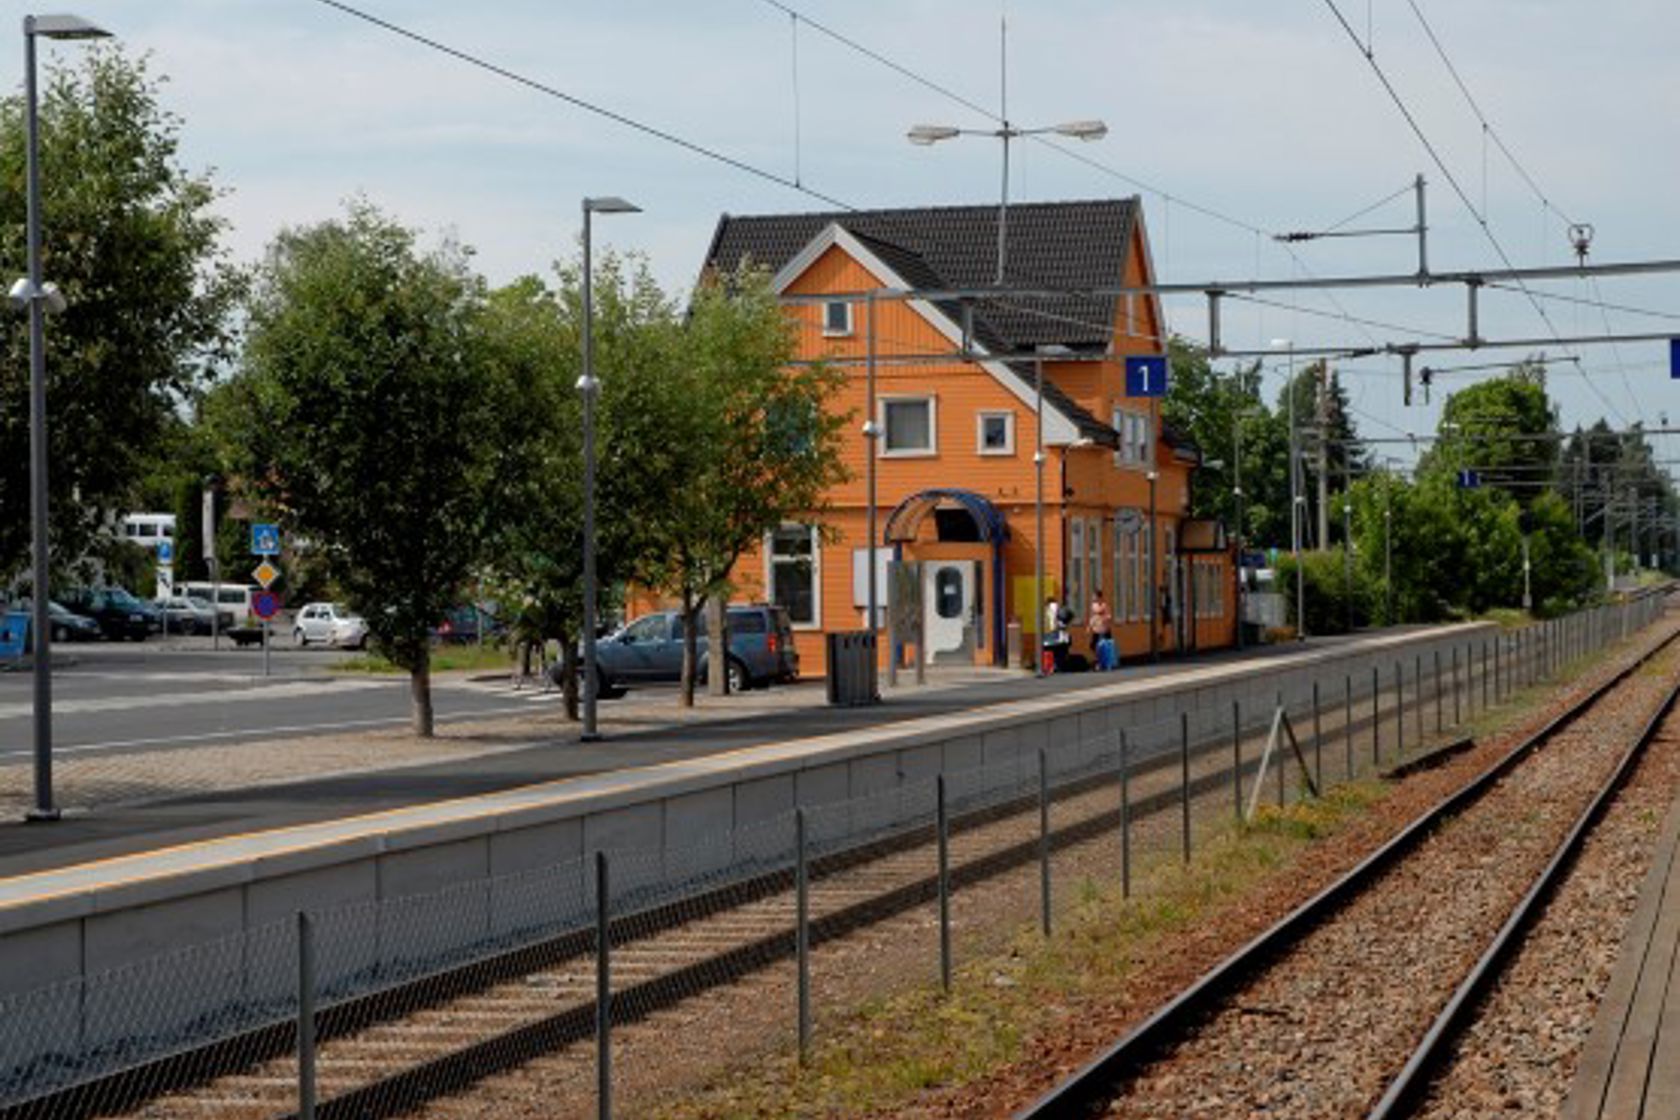 Exterior view of Stange station